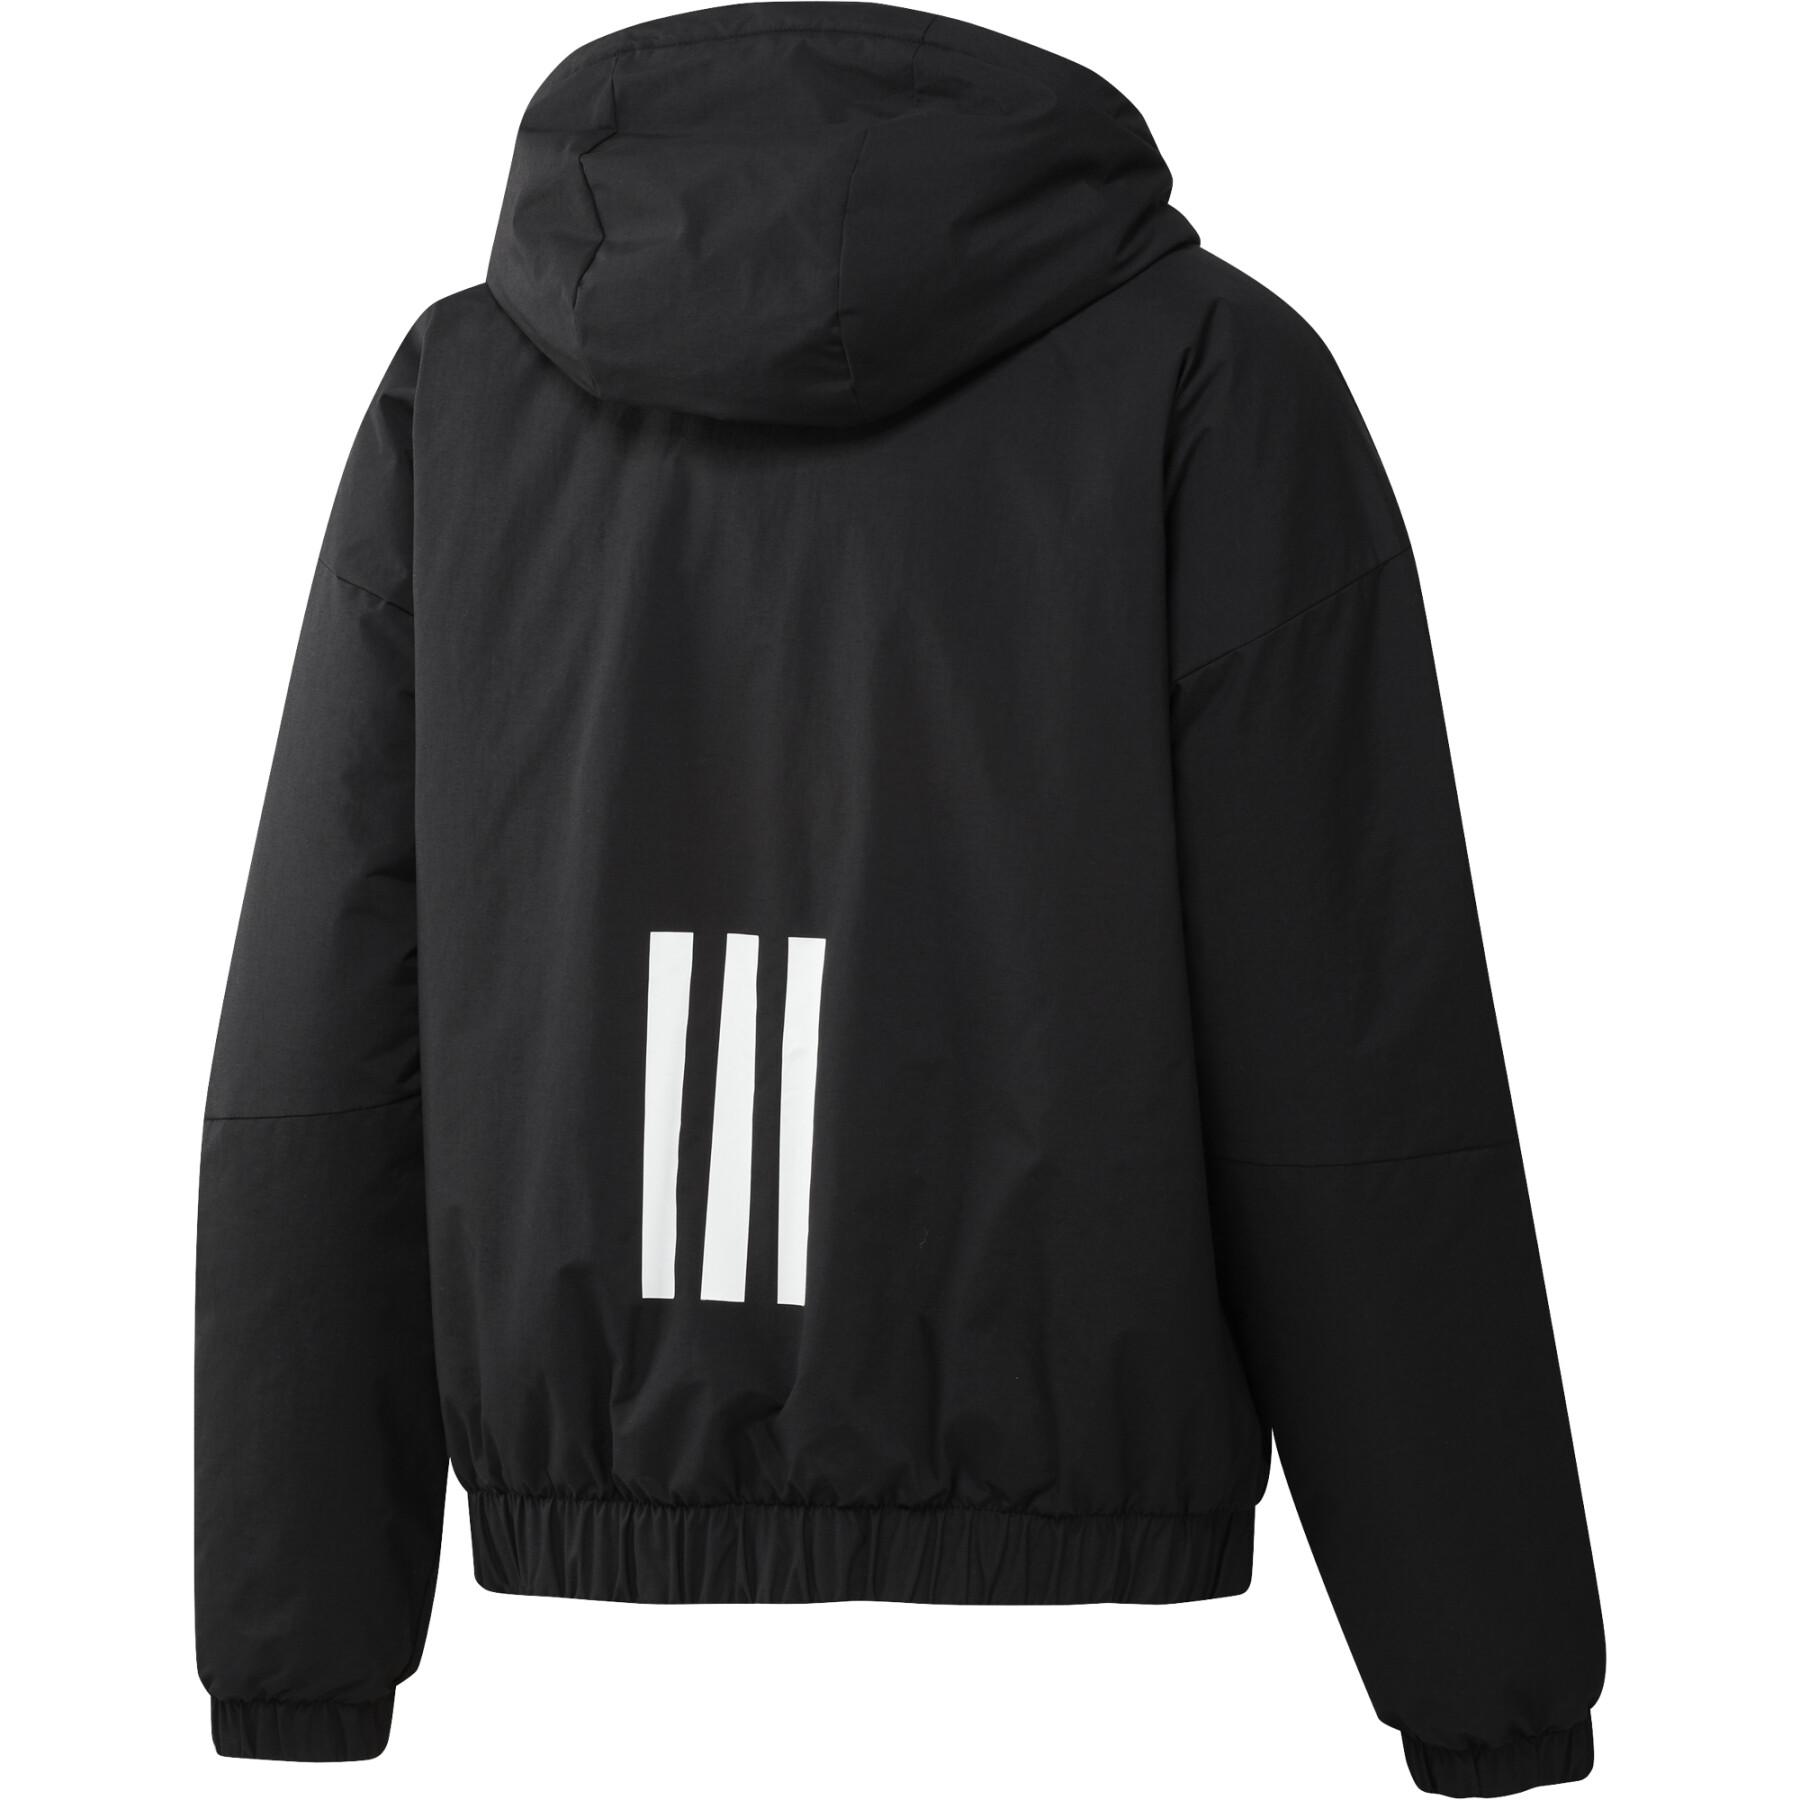 Chaqueta con capucha para mujer adidas Back to Sport Insulated